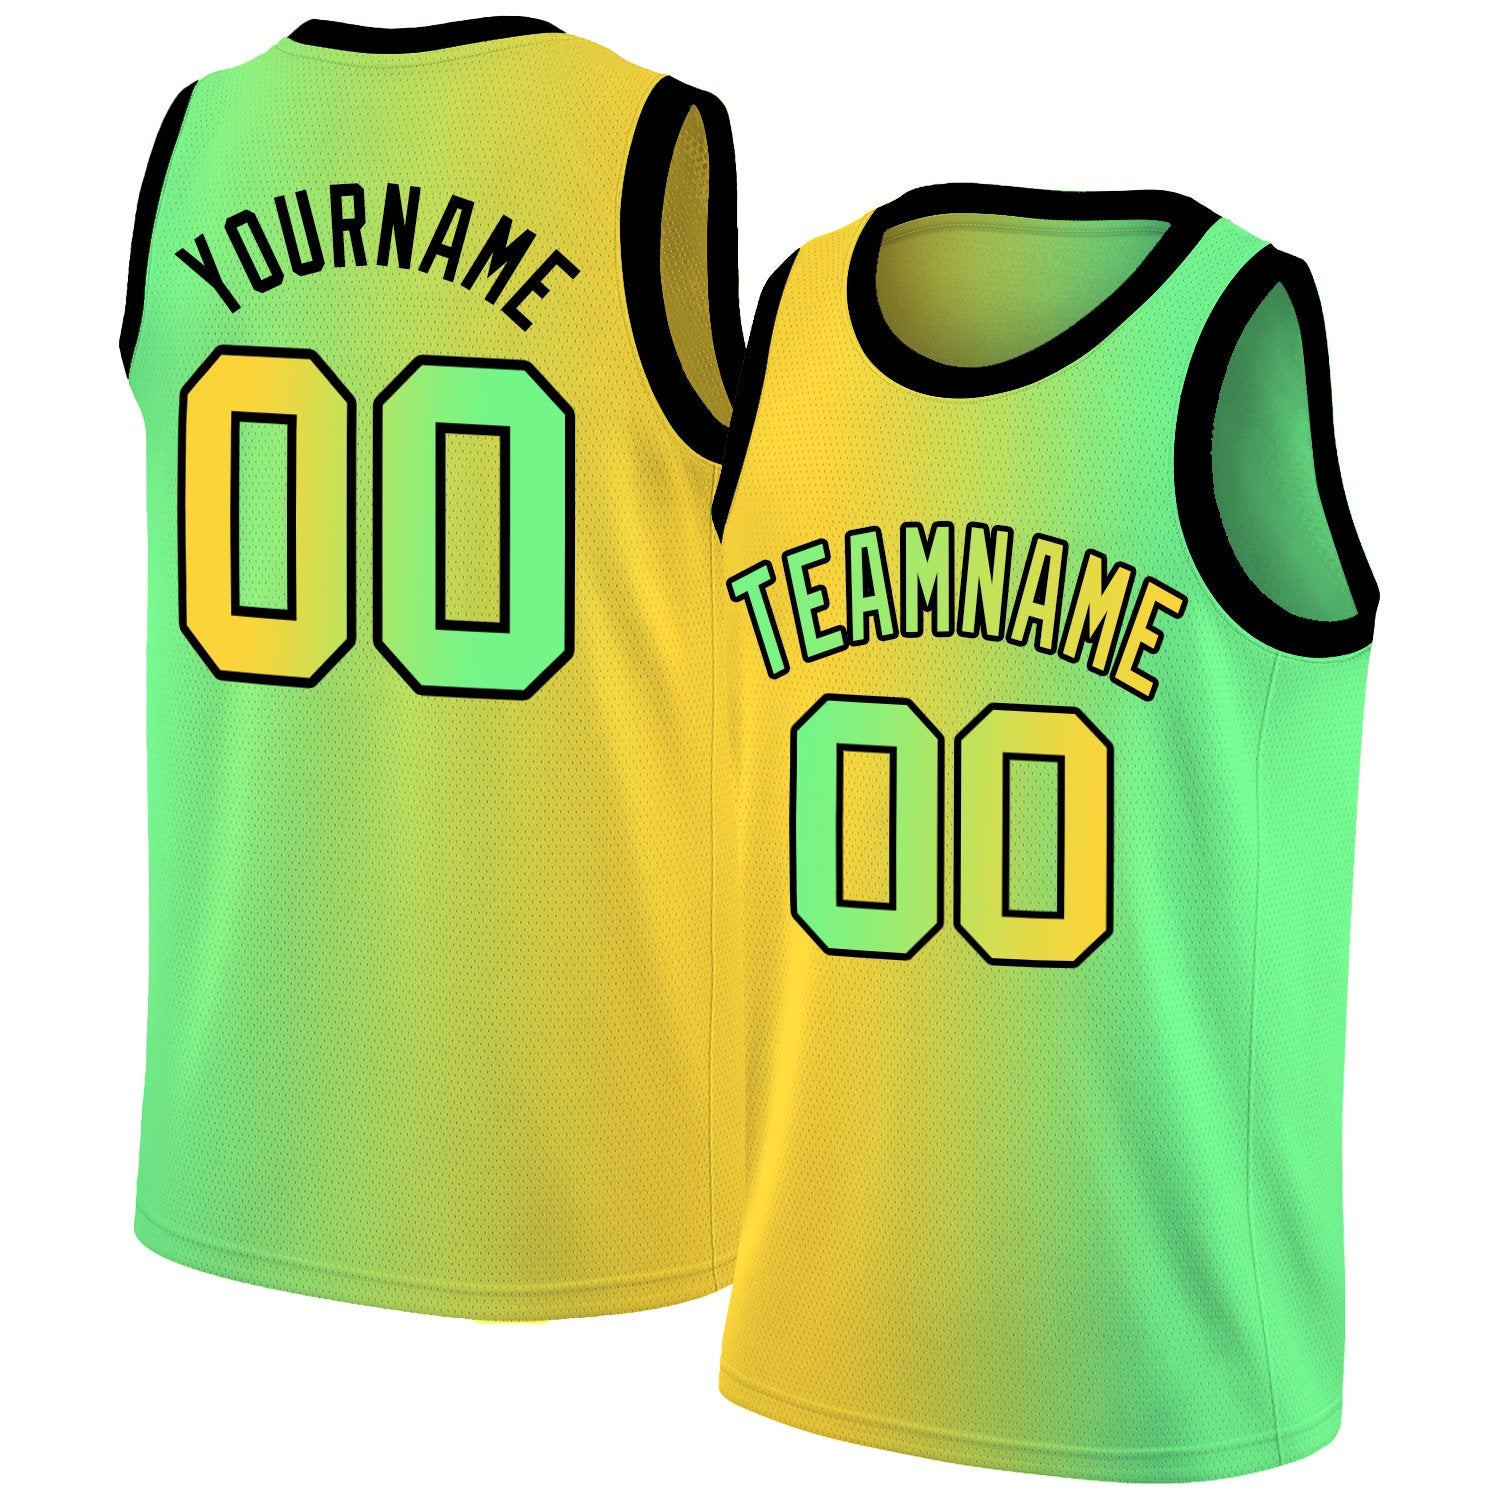 sublimation green yellow basketball jersey